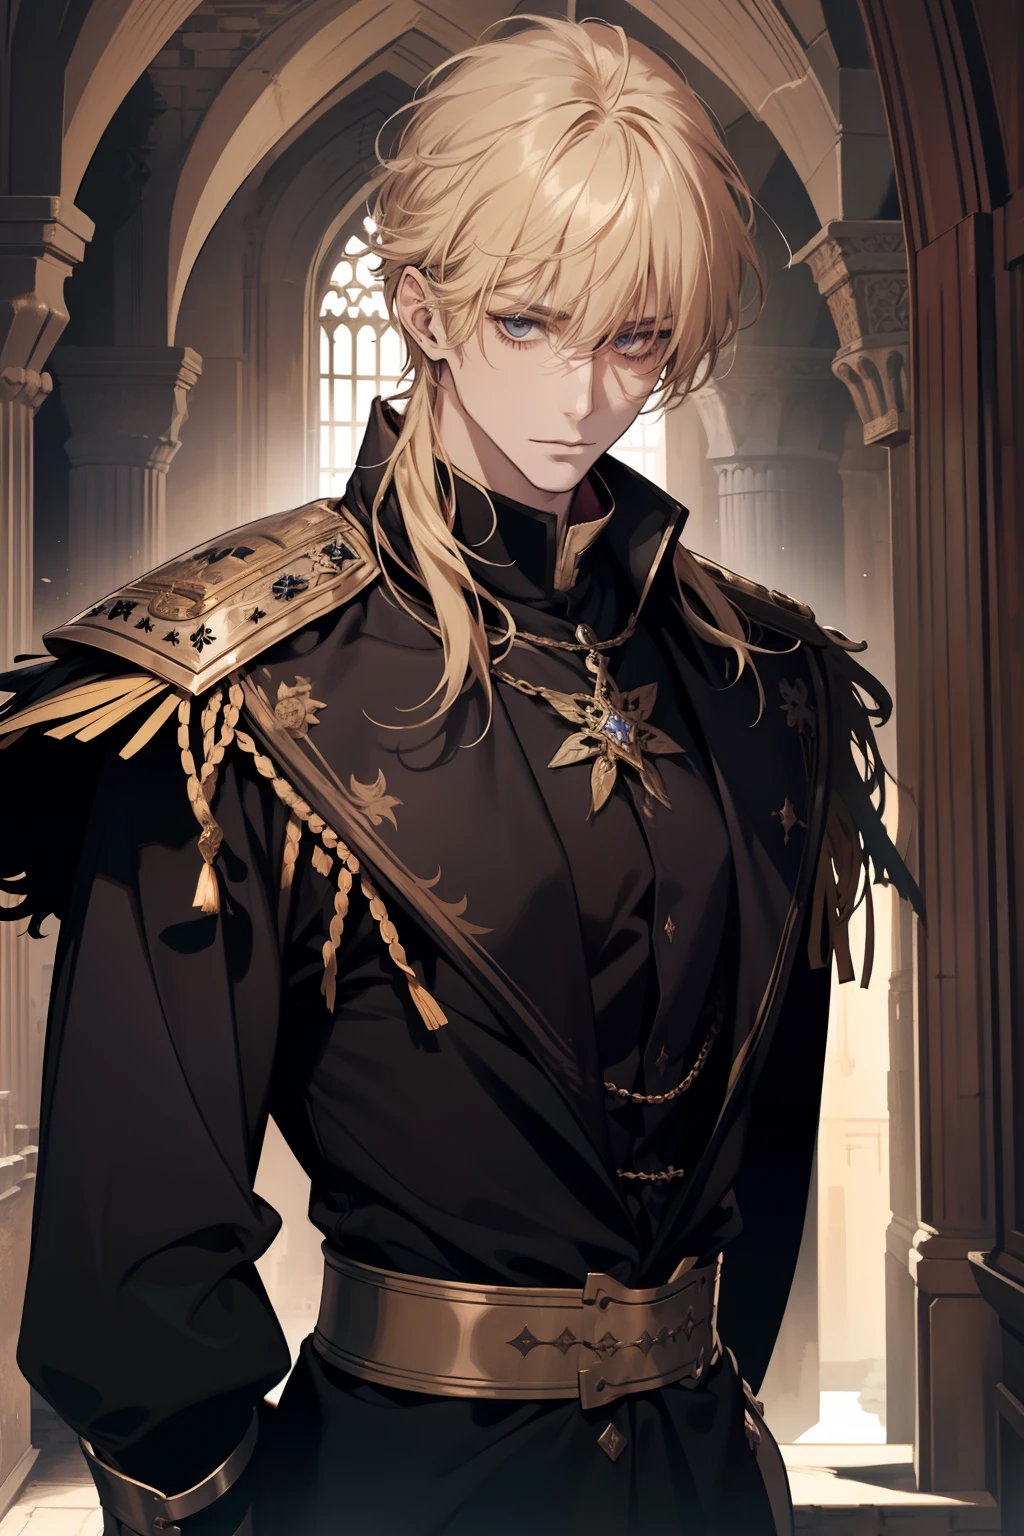 1 male, adult, messy blond hair with bangs, prince, black clothes, handsome, calm, beautiful, condescending, lean body, in a castle, medieval fantasy